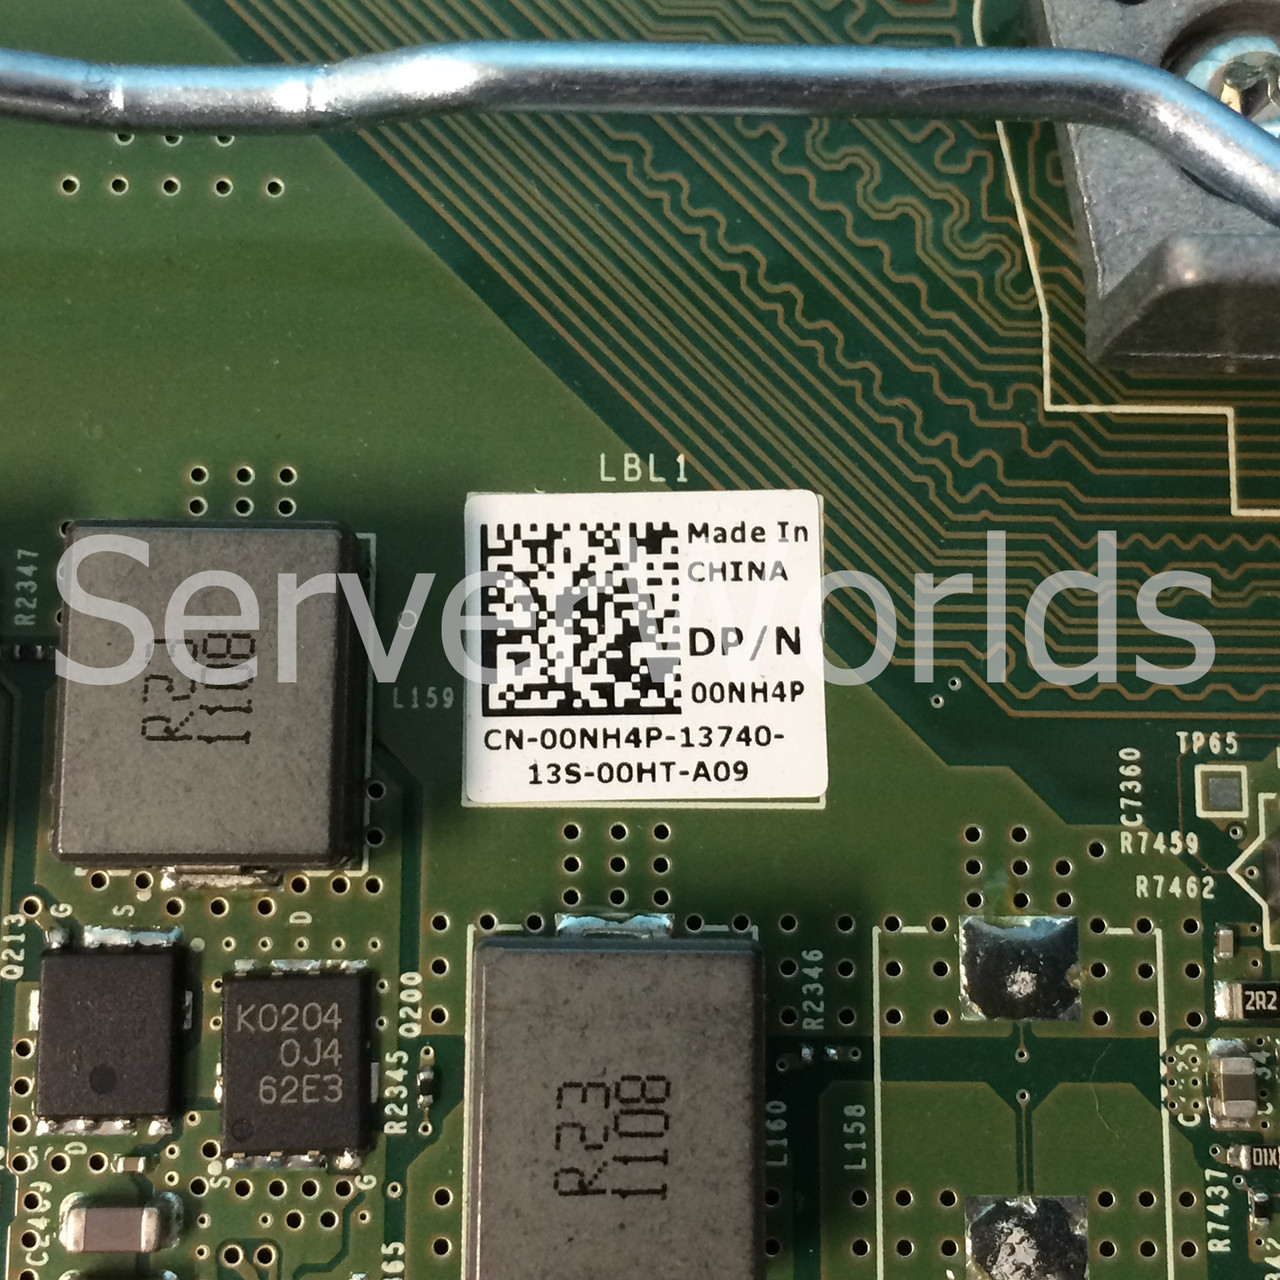 Dell 0NH4P Poweredge R710 II System Board